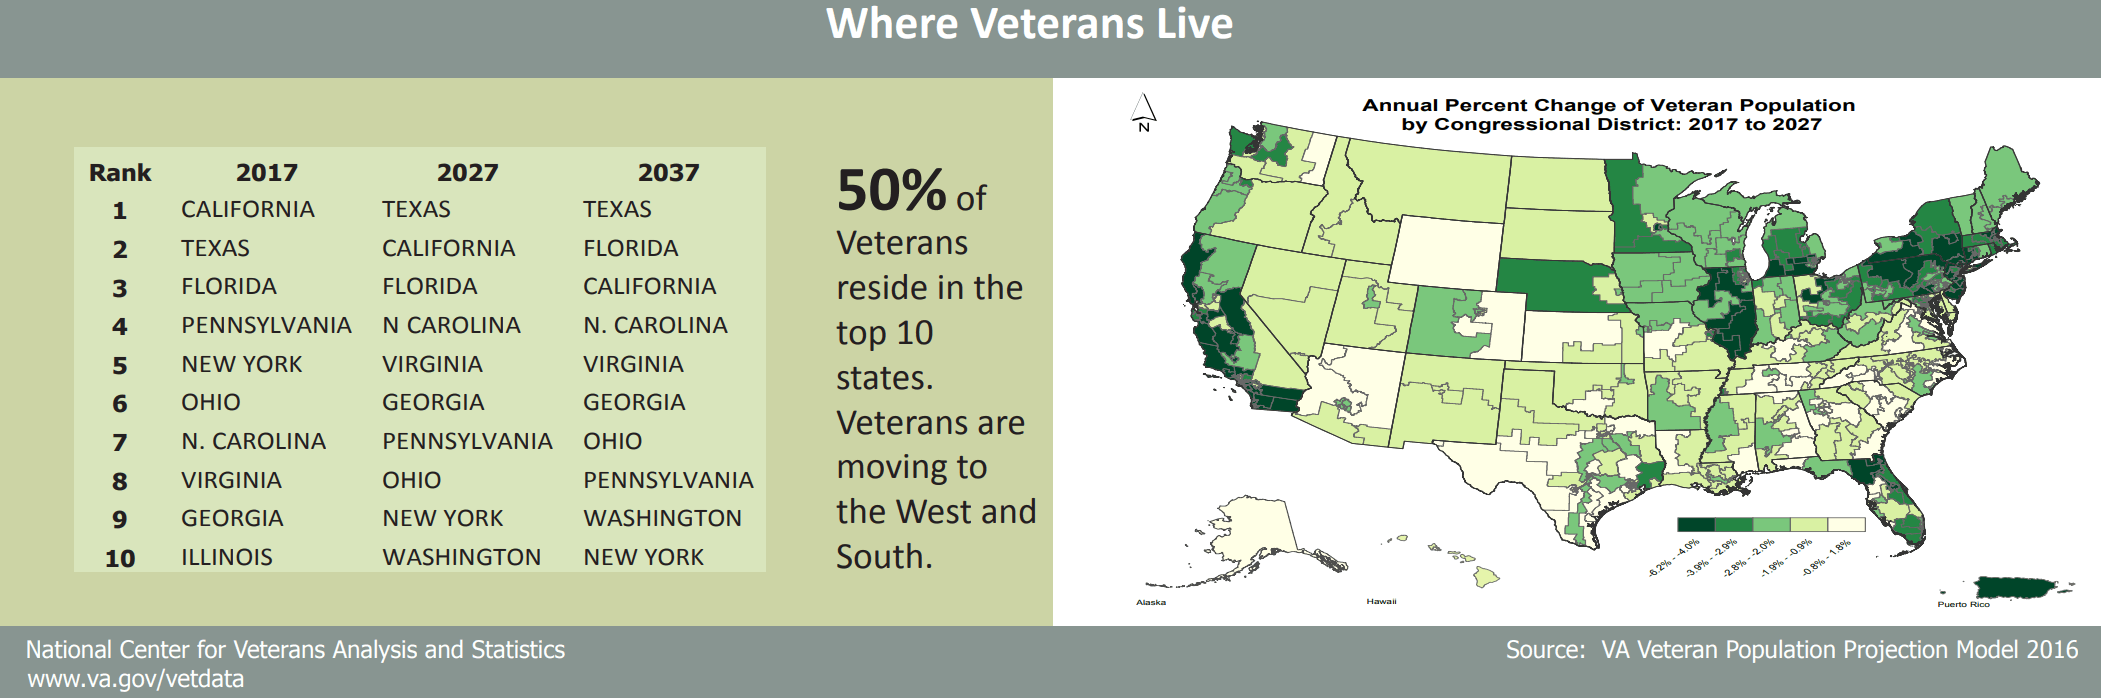 Where Veterans Live by State